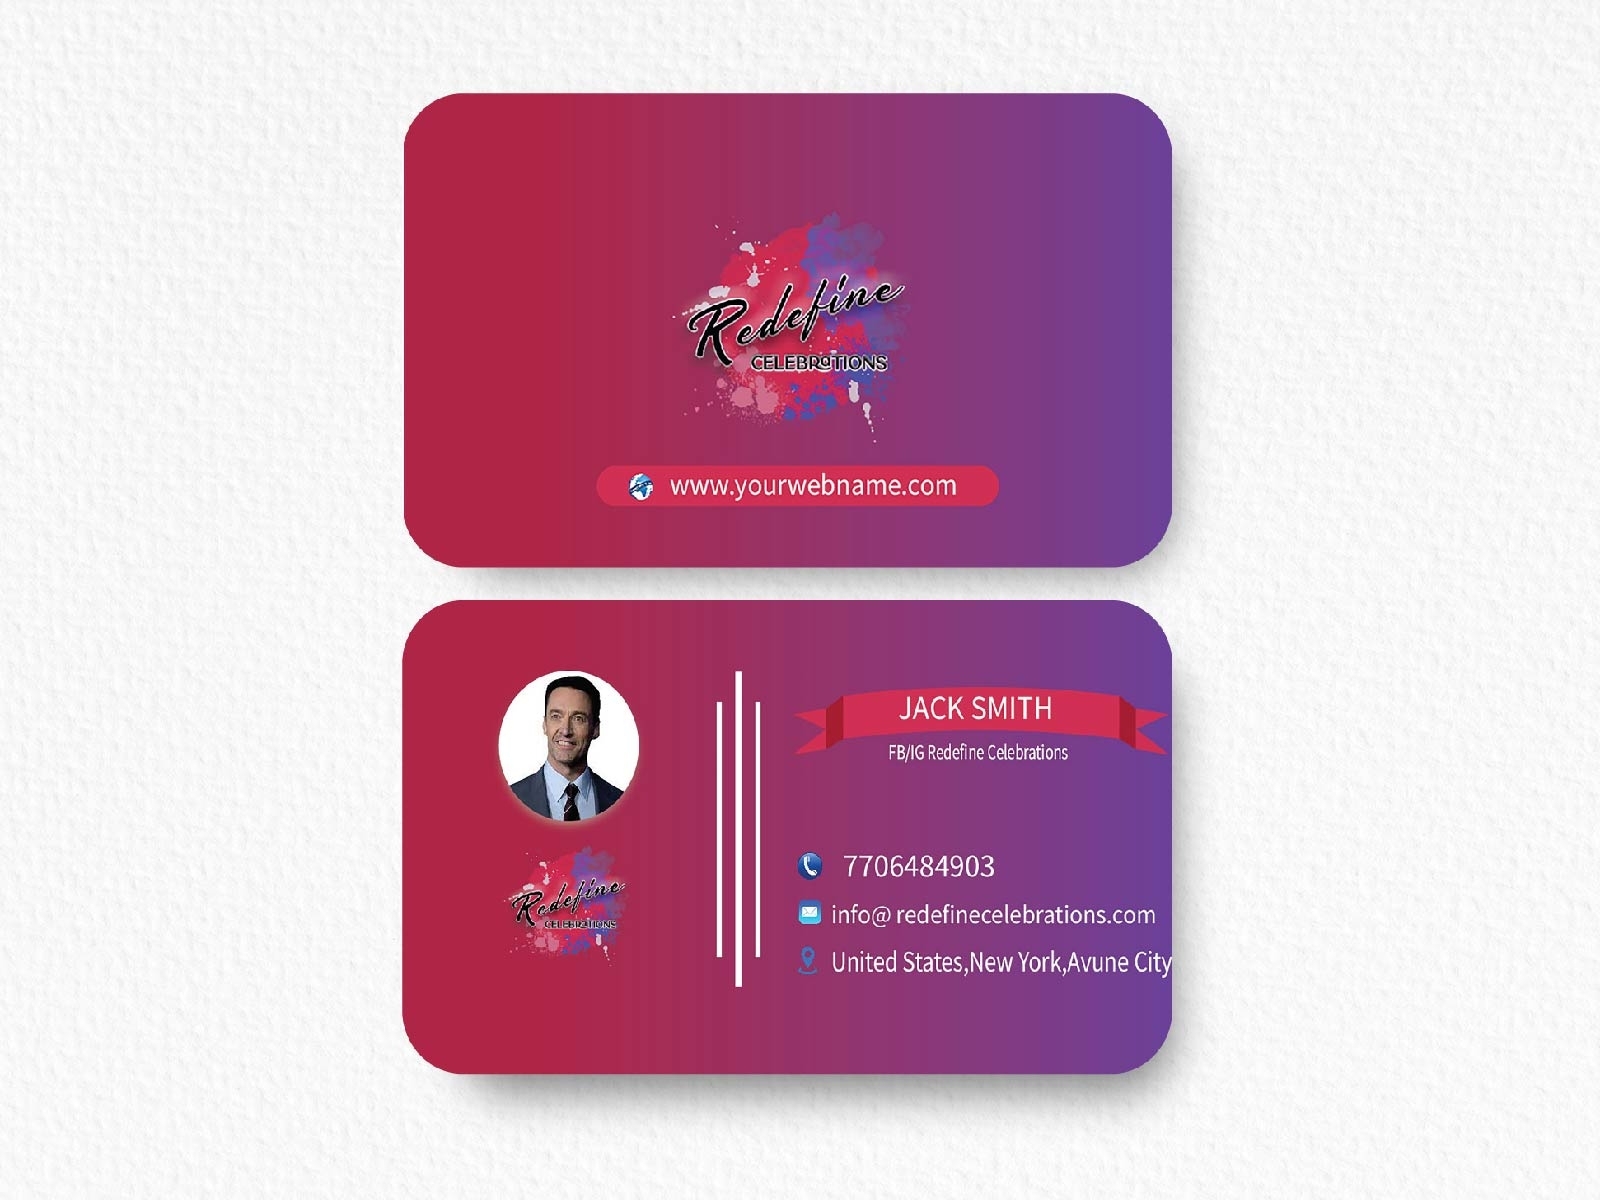 i-will-create-a-business-card-design-by-nasim-uddin-on-dribbble